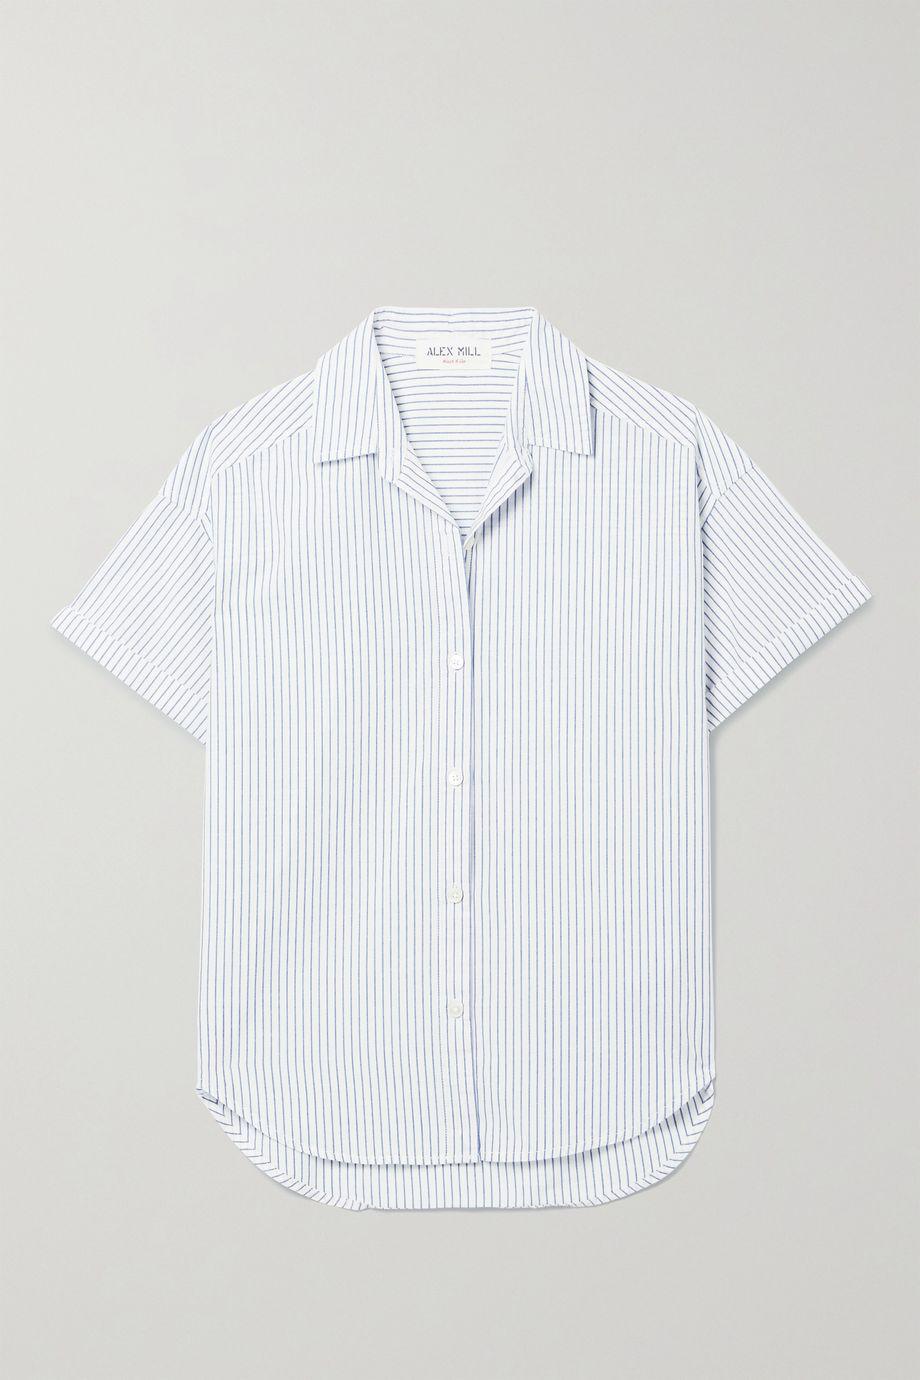 Easy striped cotton shirt by ALEX MILL